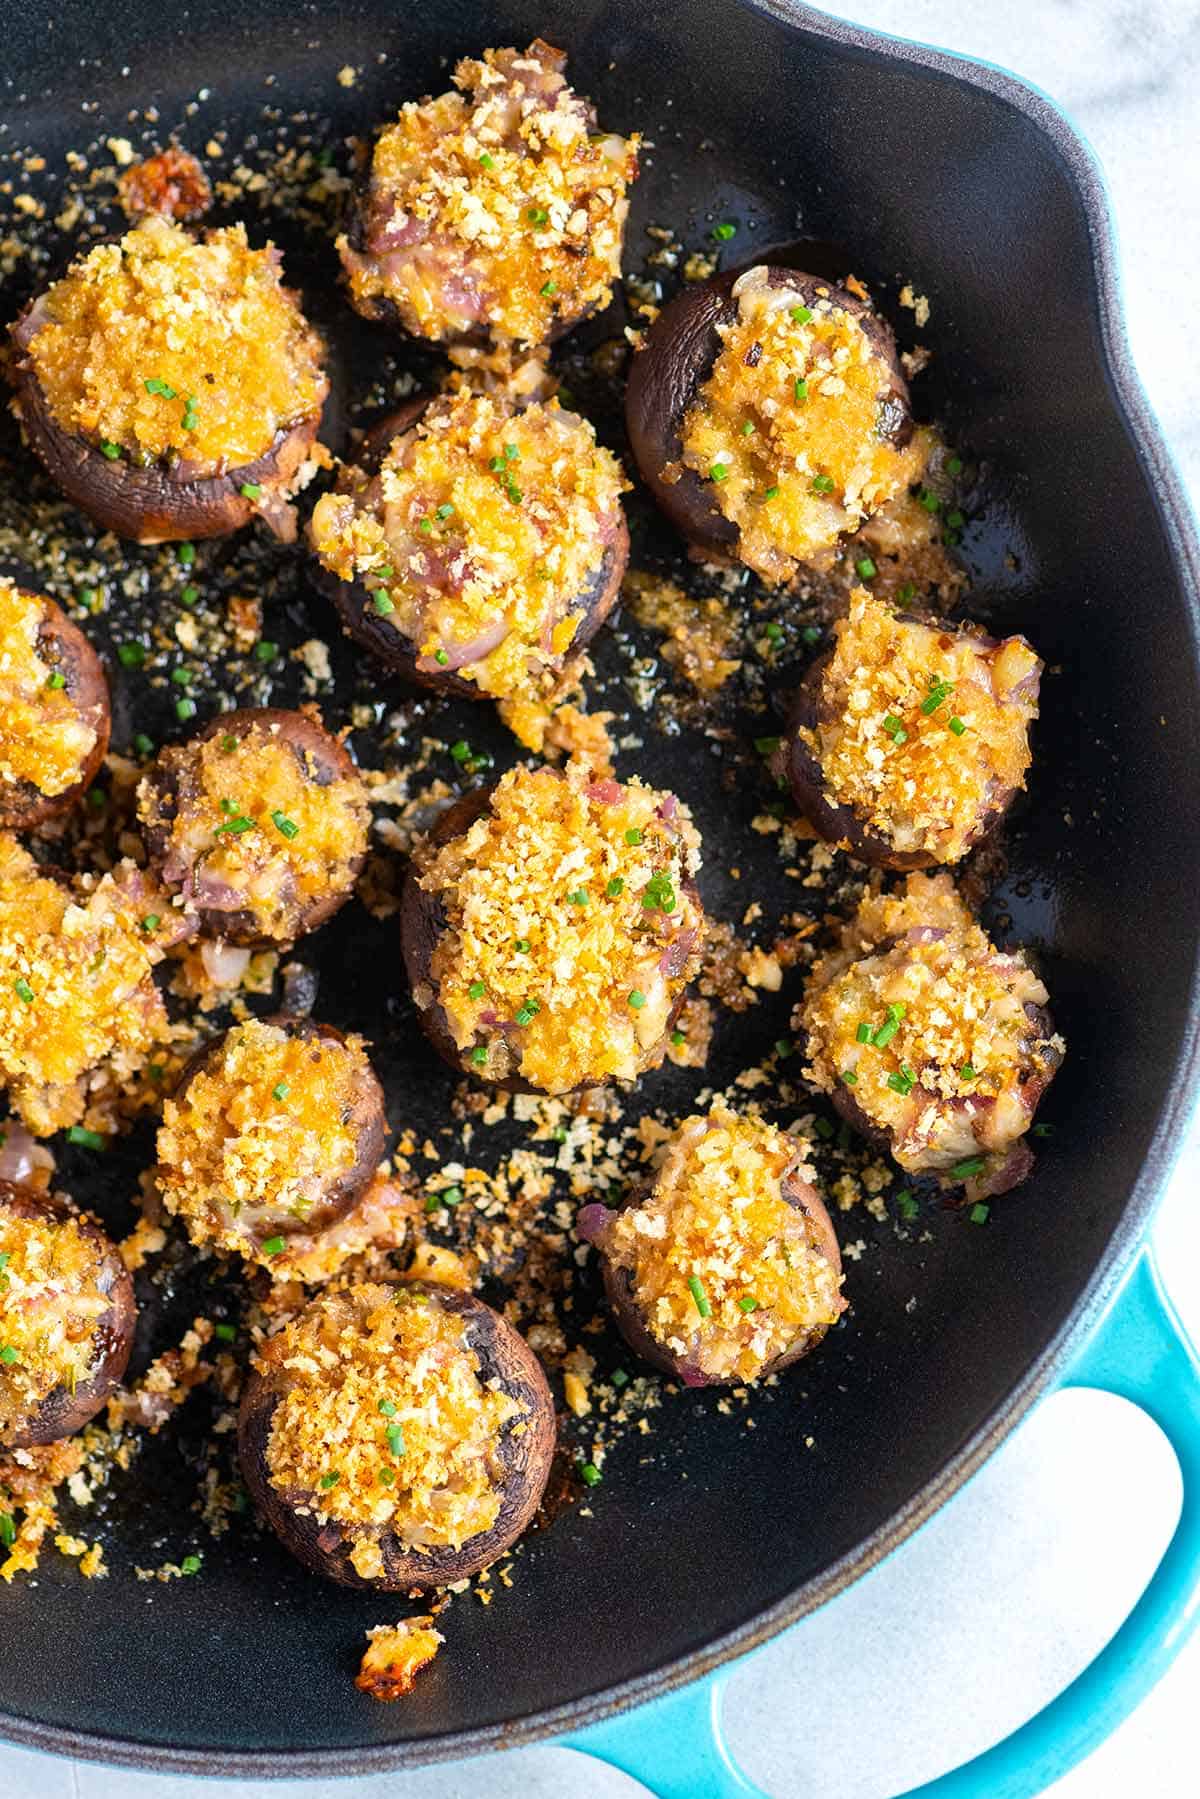 How to Make the Best Stuffed Mushrooms with Cheese and Garlic